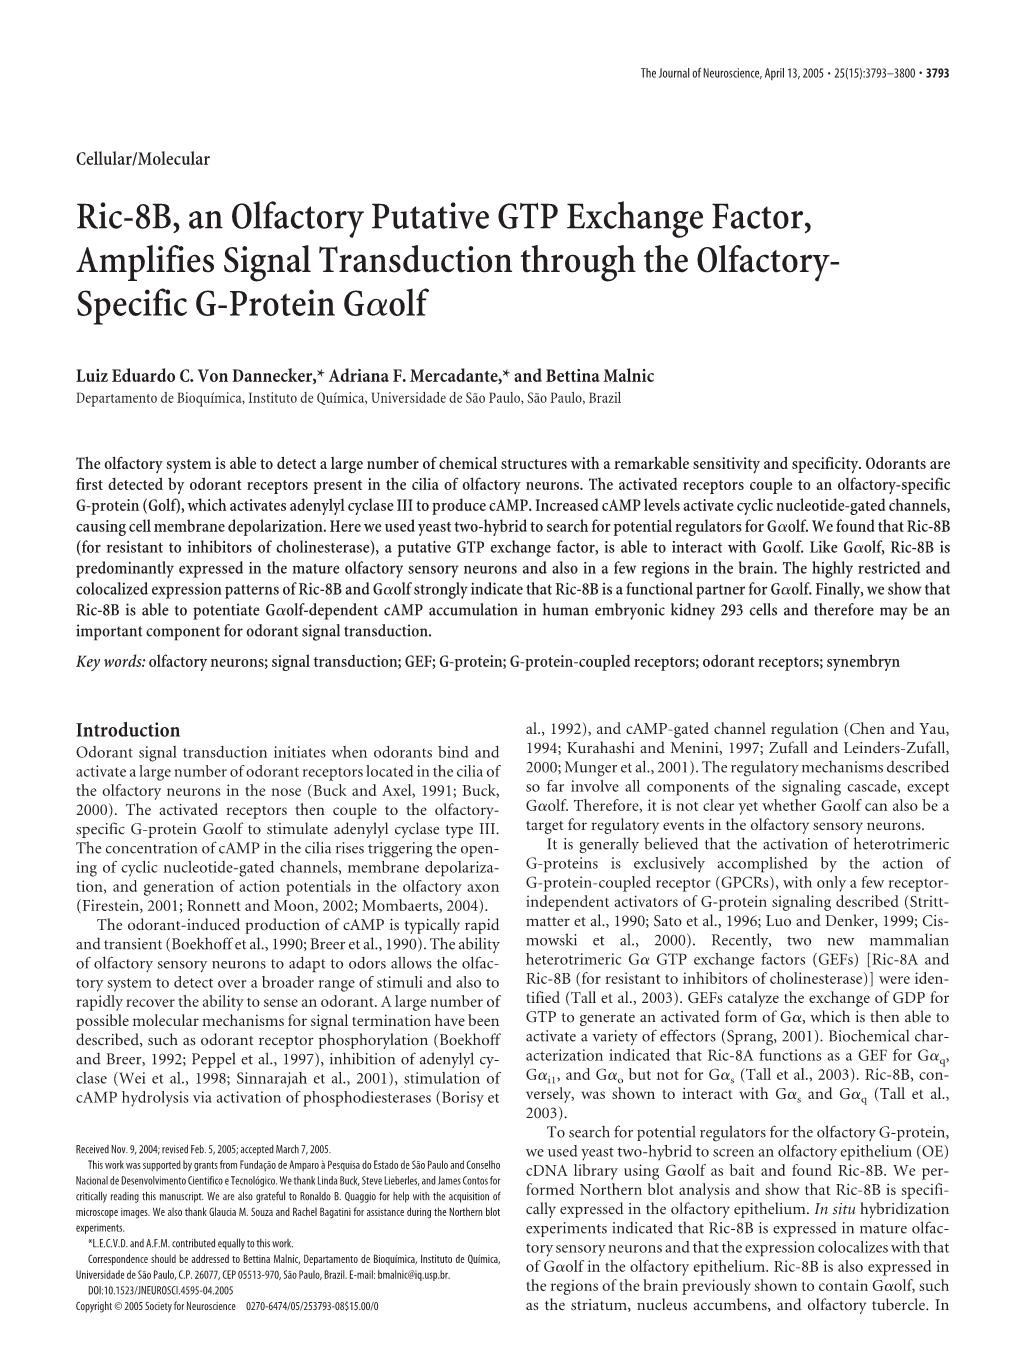 Ric-8B, an Olfactory Putative GTP Exchange Factor, Amplifies Signal Transduction Through the Olfactory- Specific G-Protein G␣Olf